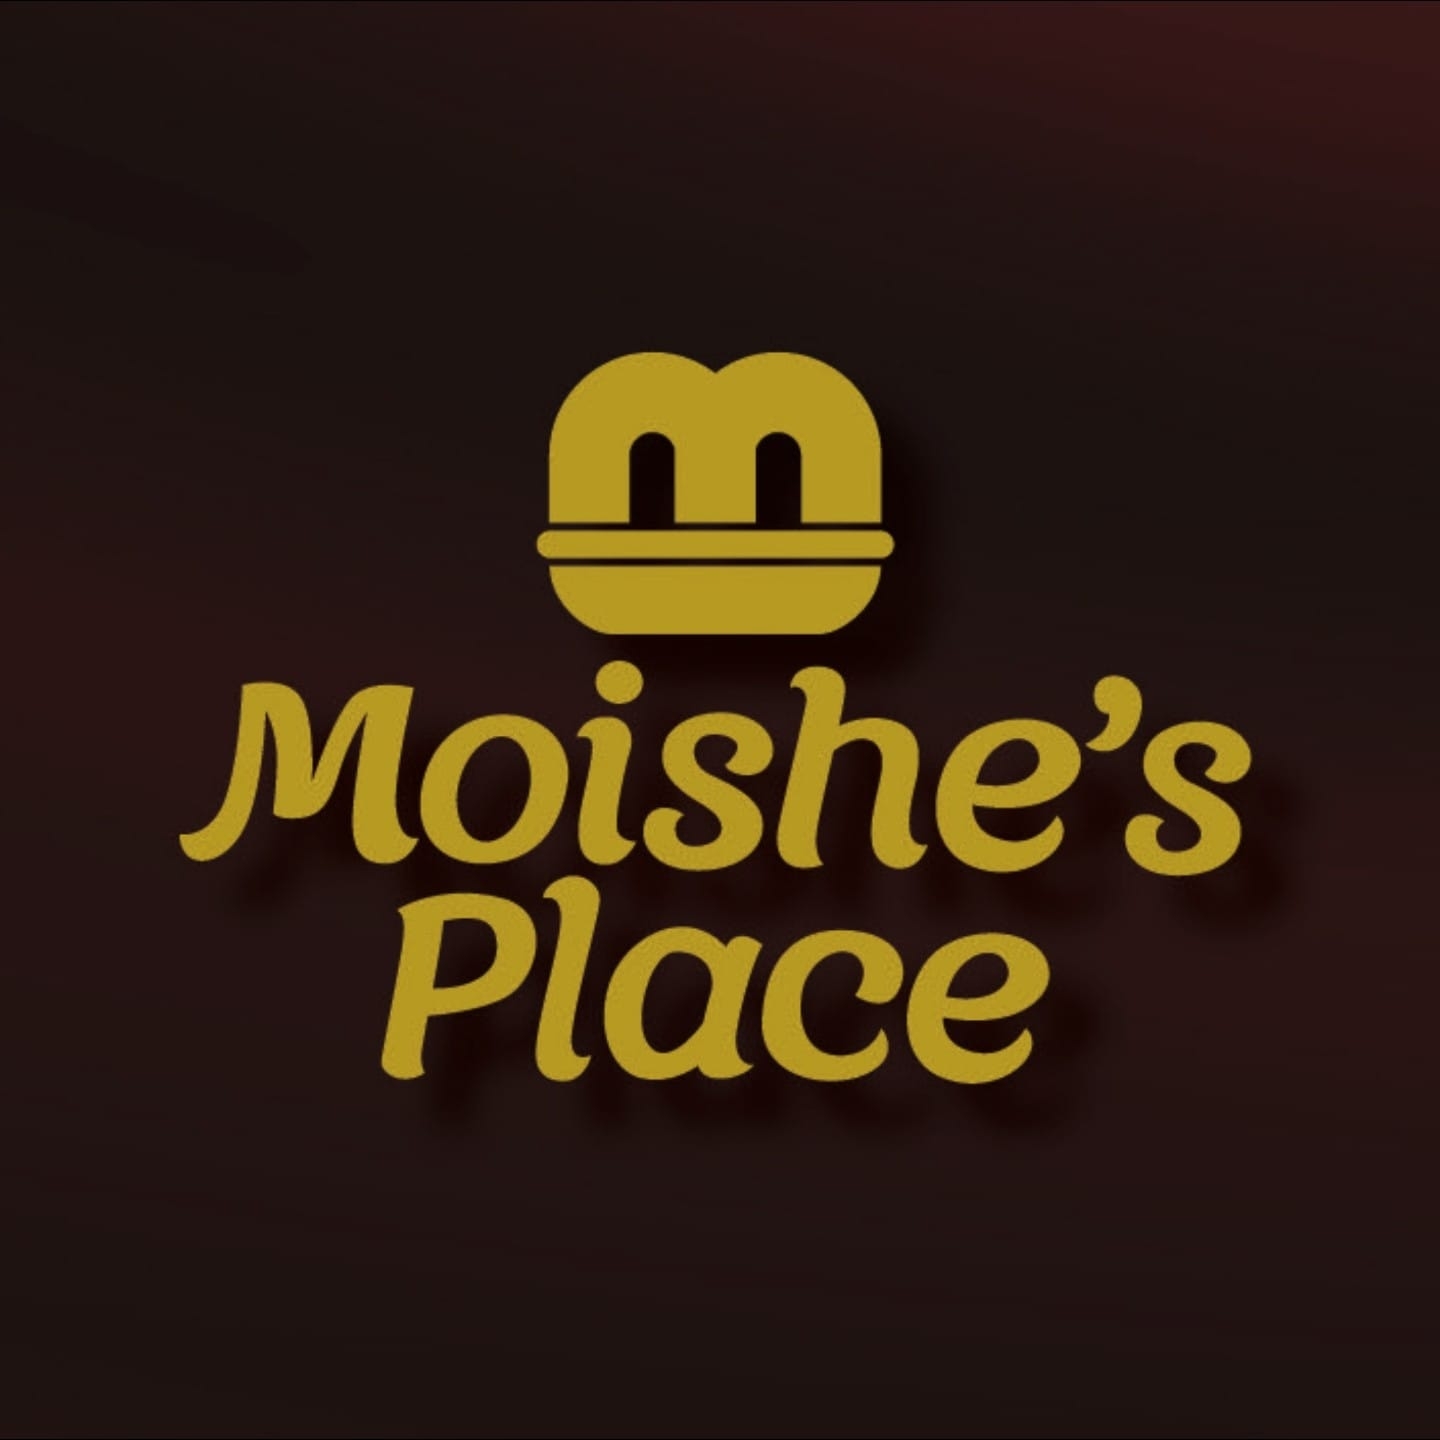 Moishe's Place Brooklyn